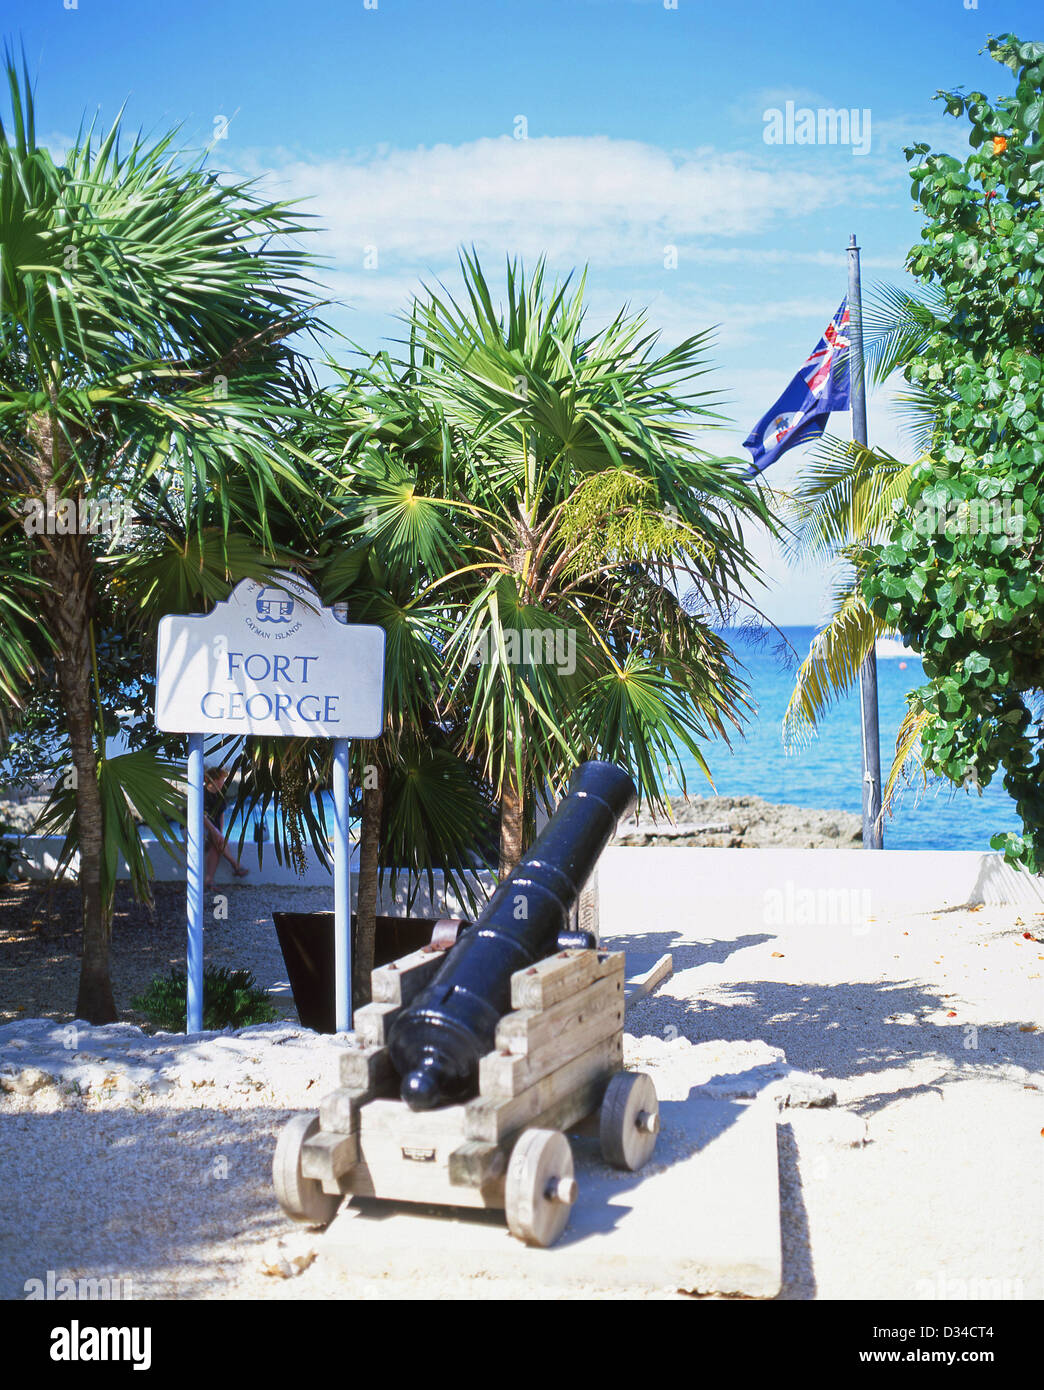 Remains of Fort George, George Town, Grand Cayman, Cayman Islands, Greater Antilles, Caribbean Stock Photo